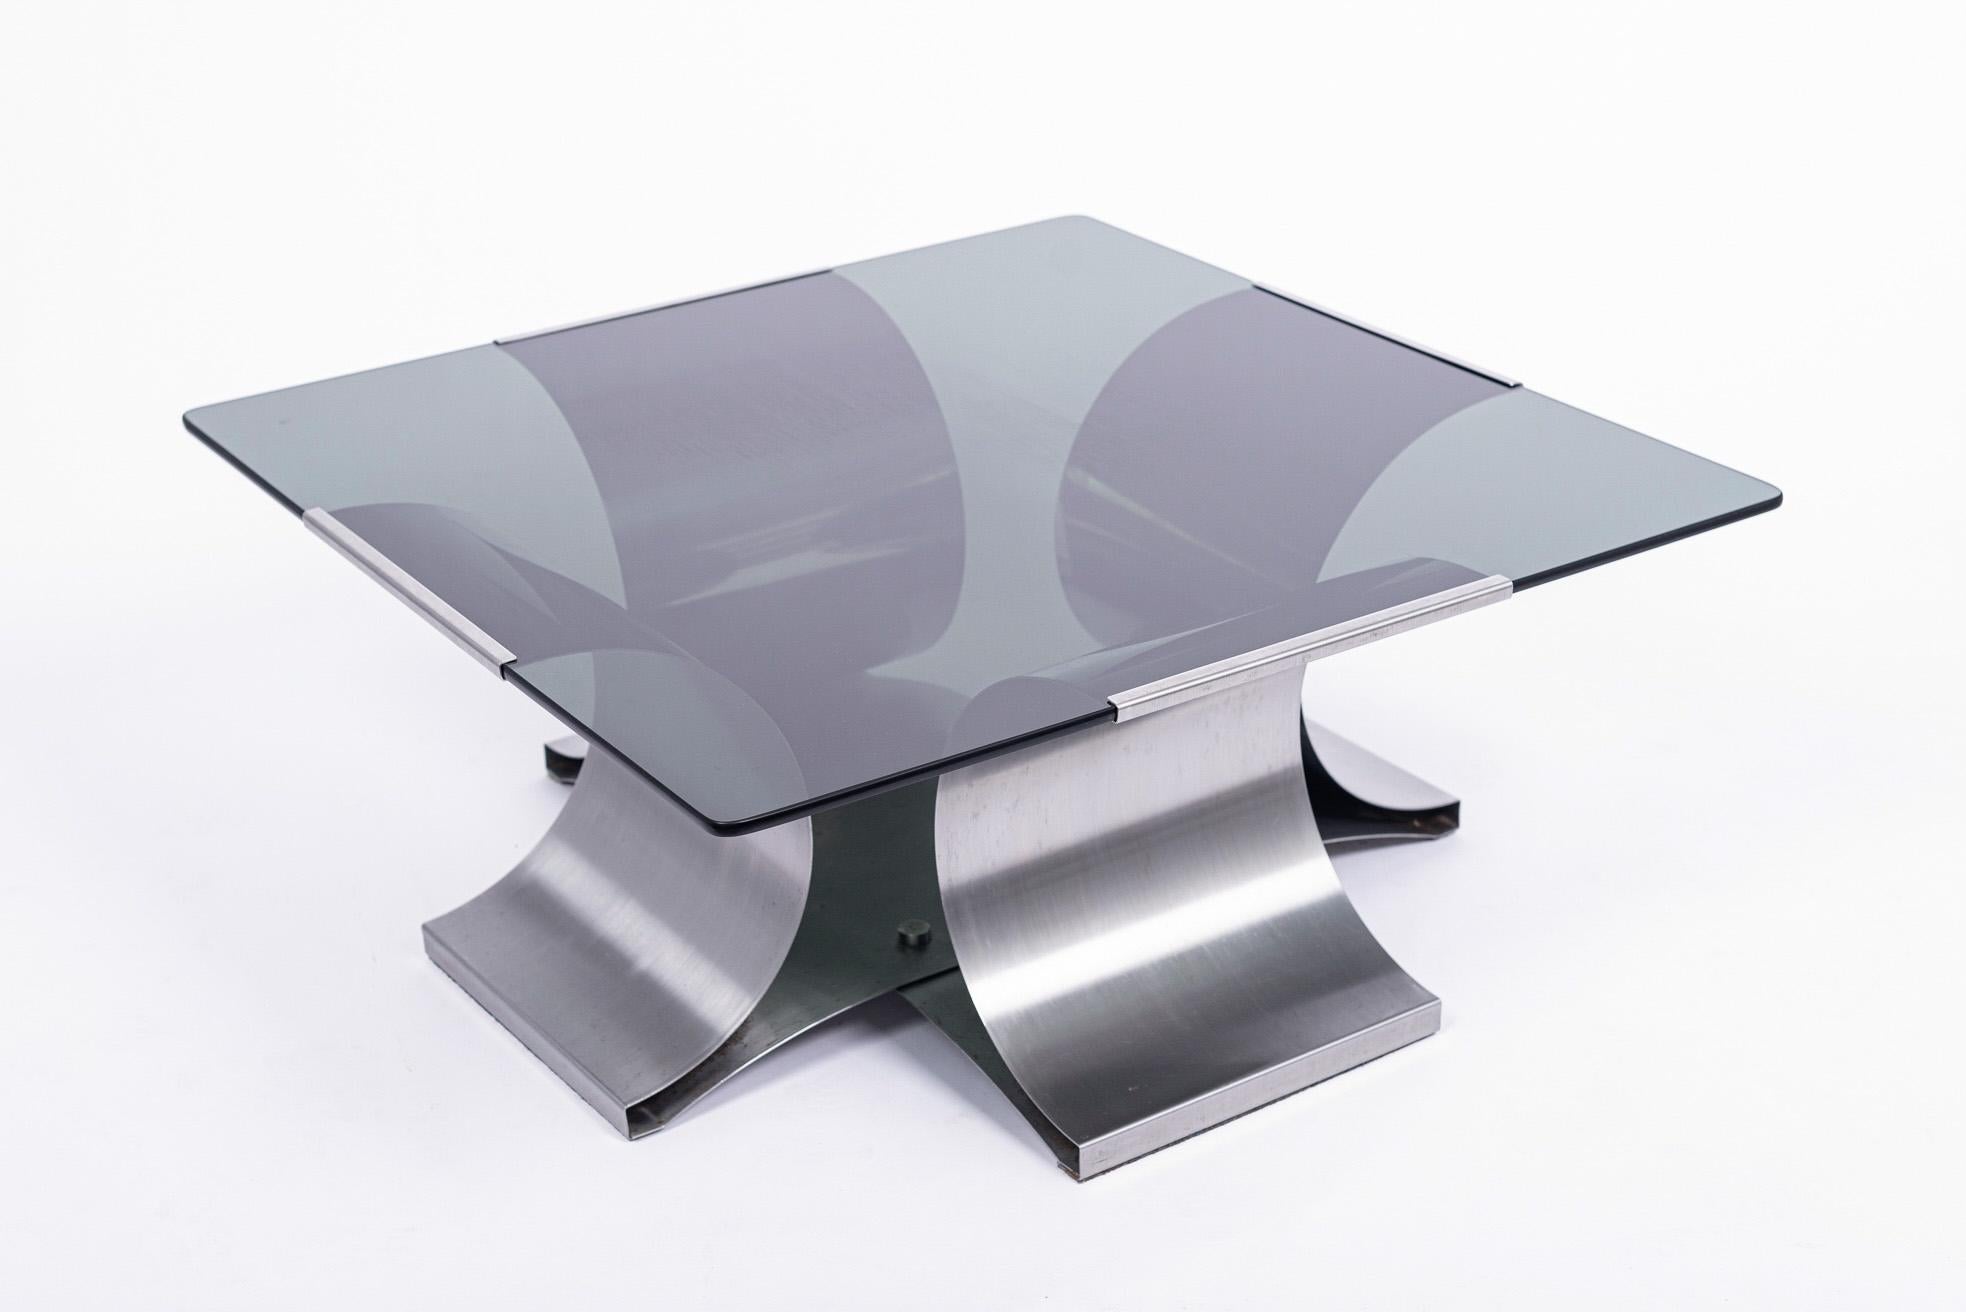 This vintage Mid-Century Modern steel and glass square coffee table designed by François Monnet for Kappa was made in France circa 1970. The inventive, Space Age design features a curved brushed stainless steel base with a 3/8” dark gray tinted